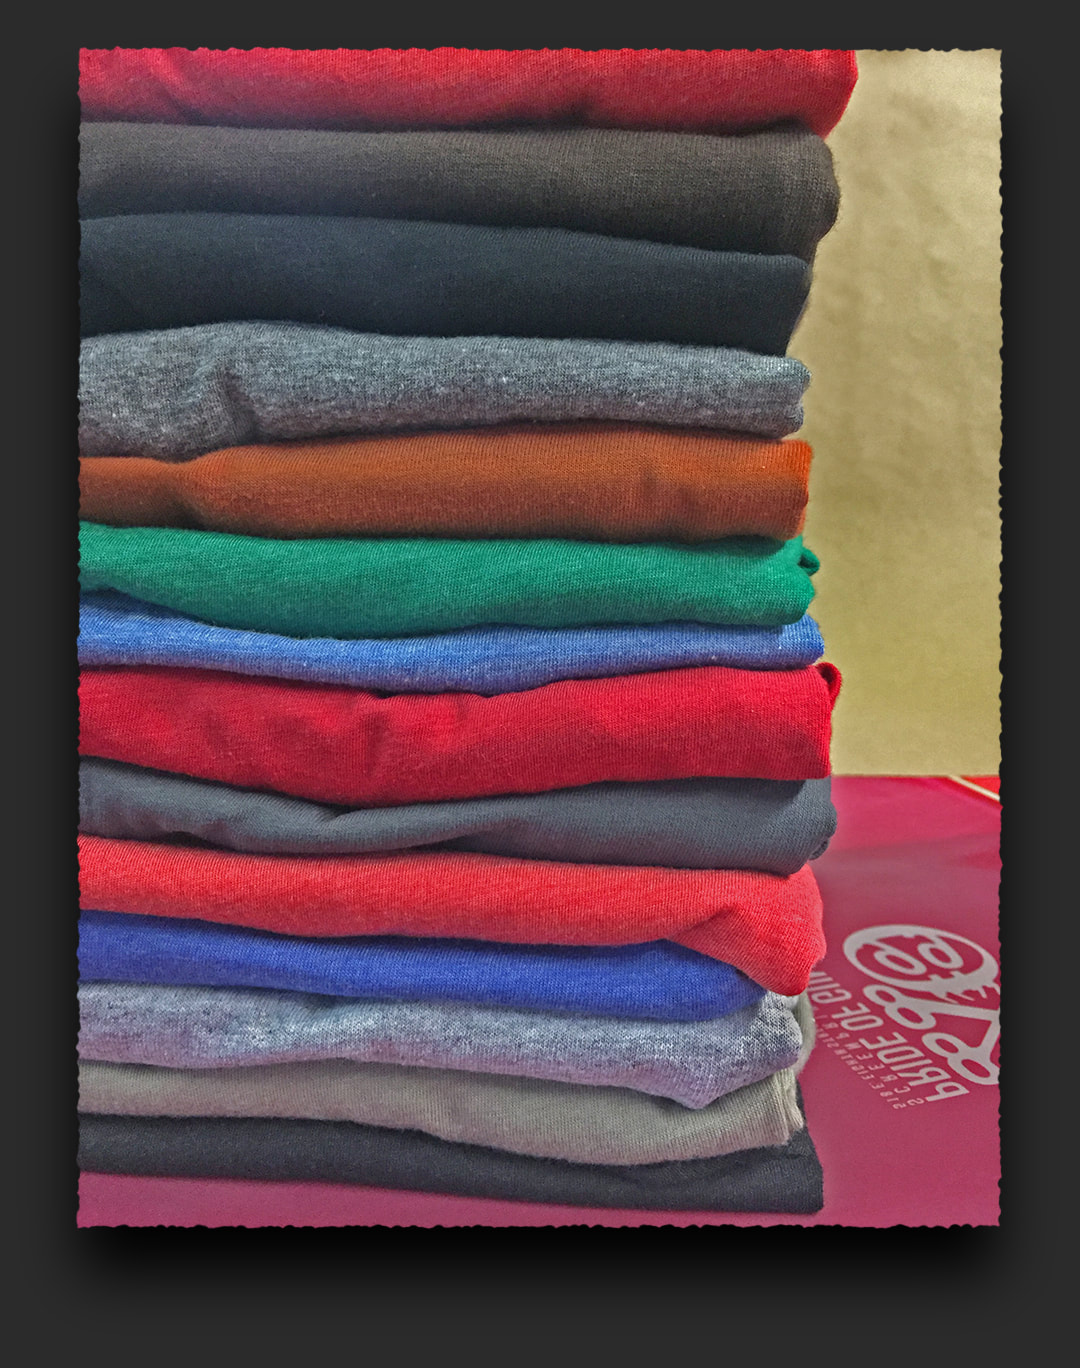 The Shirt Stack